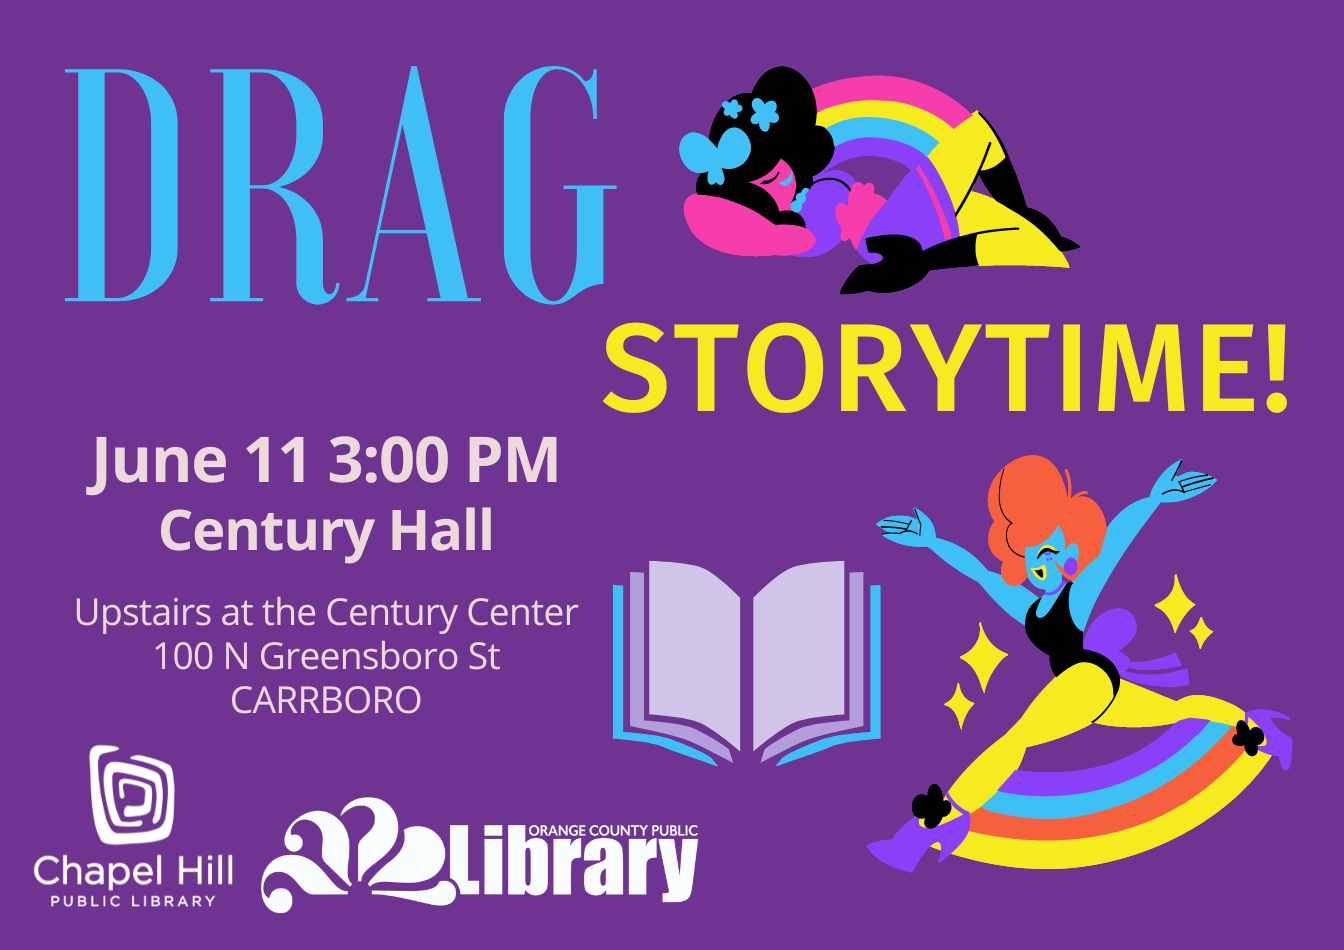 A purple flyer with cartoon images of drag performers. Text: Drag storytime! June 11, 3 pm. Century Hall, upstairs at the Century Center, 100 North Greensboro Street, Carrboro.